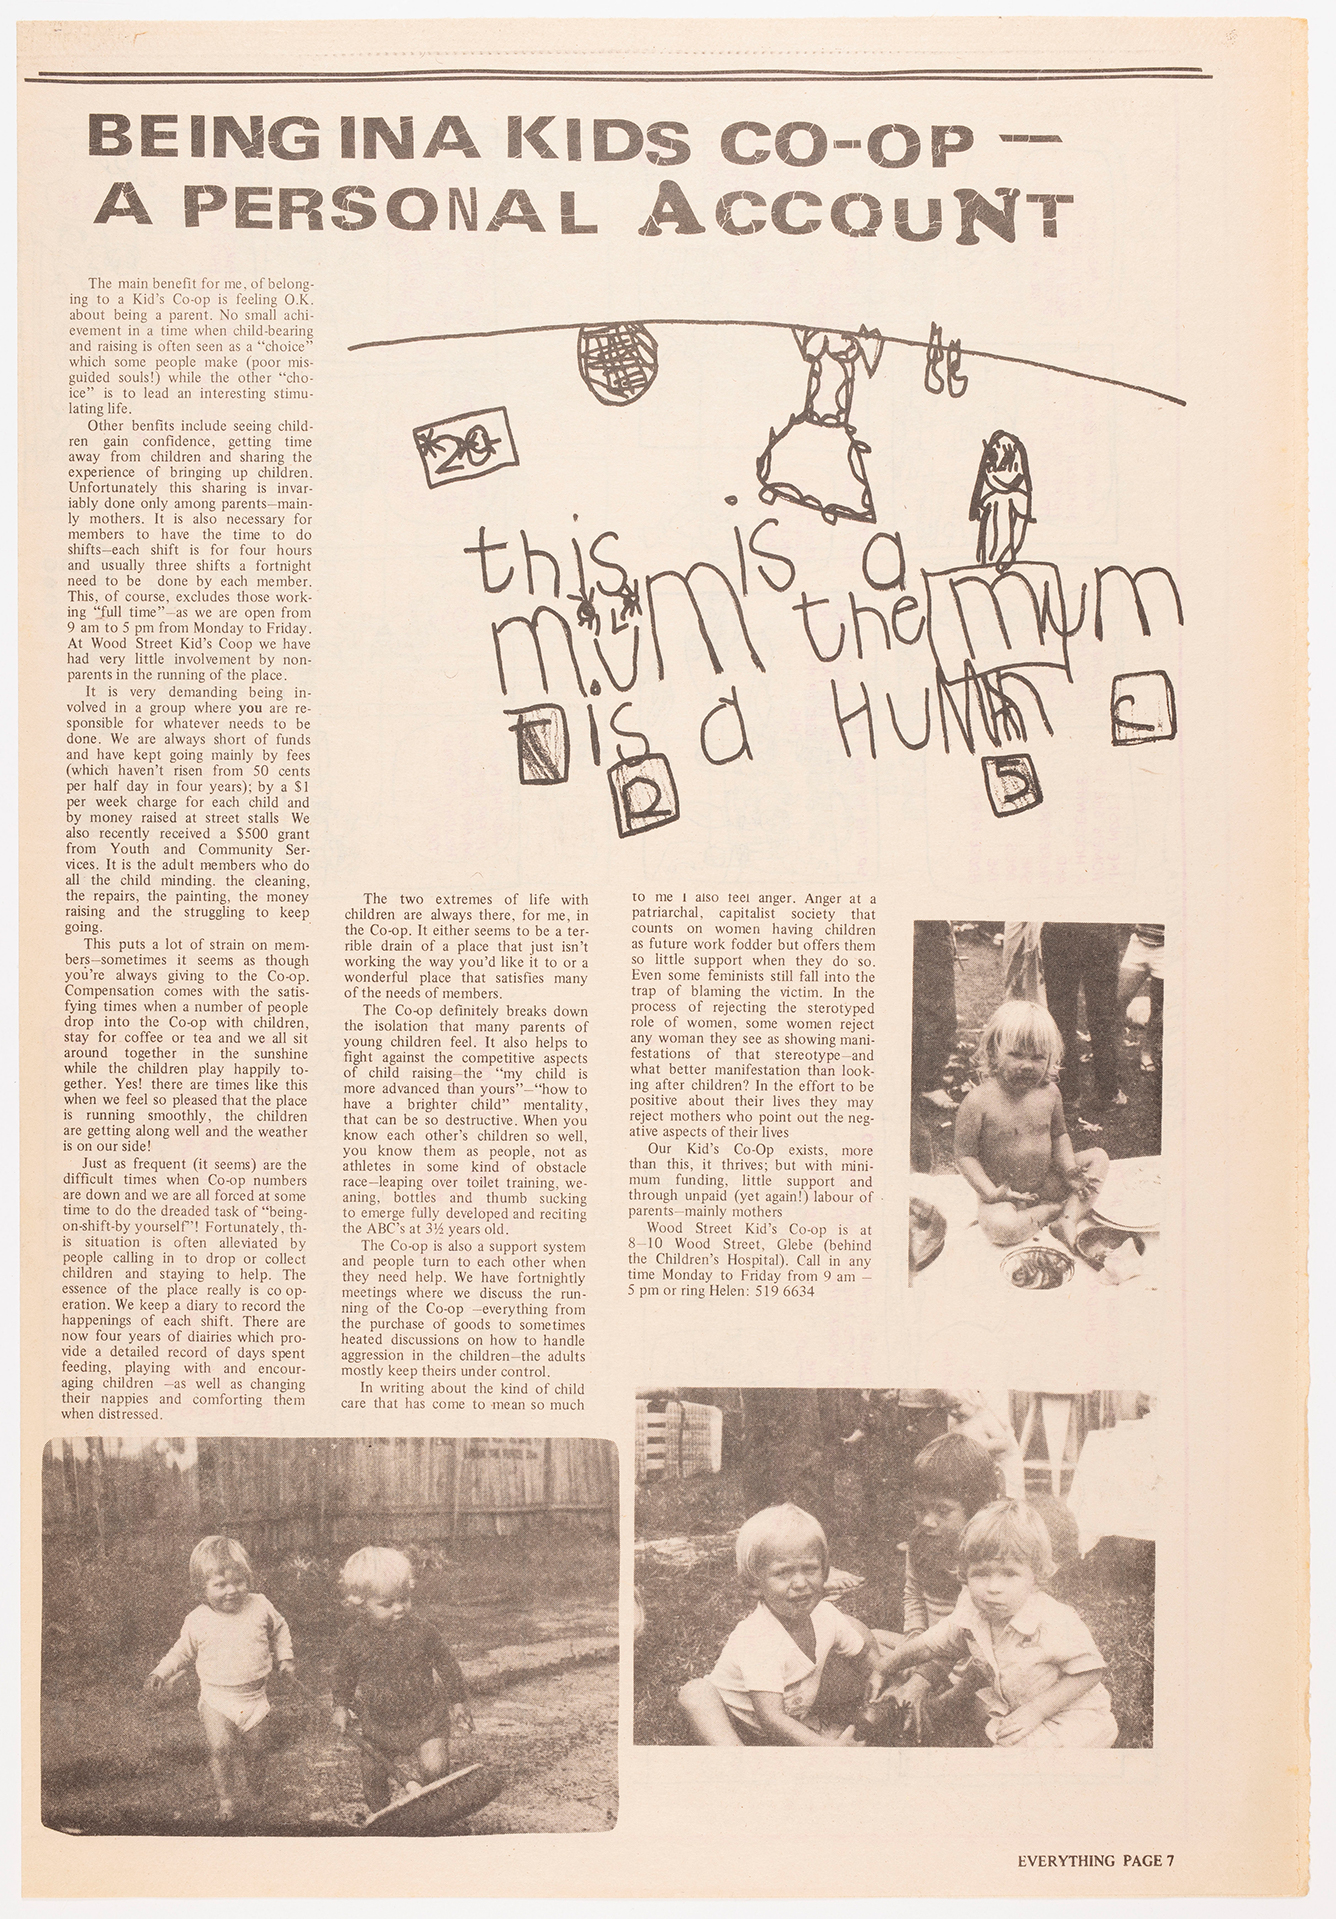 Article with illustrations and the headline "Being in a kids co-op - a personal account".